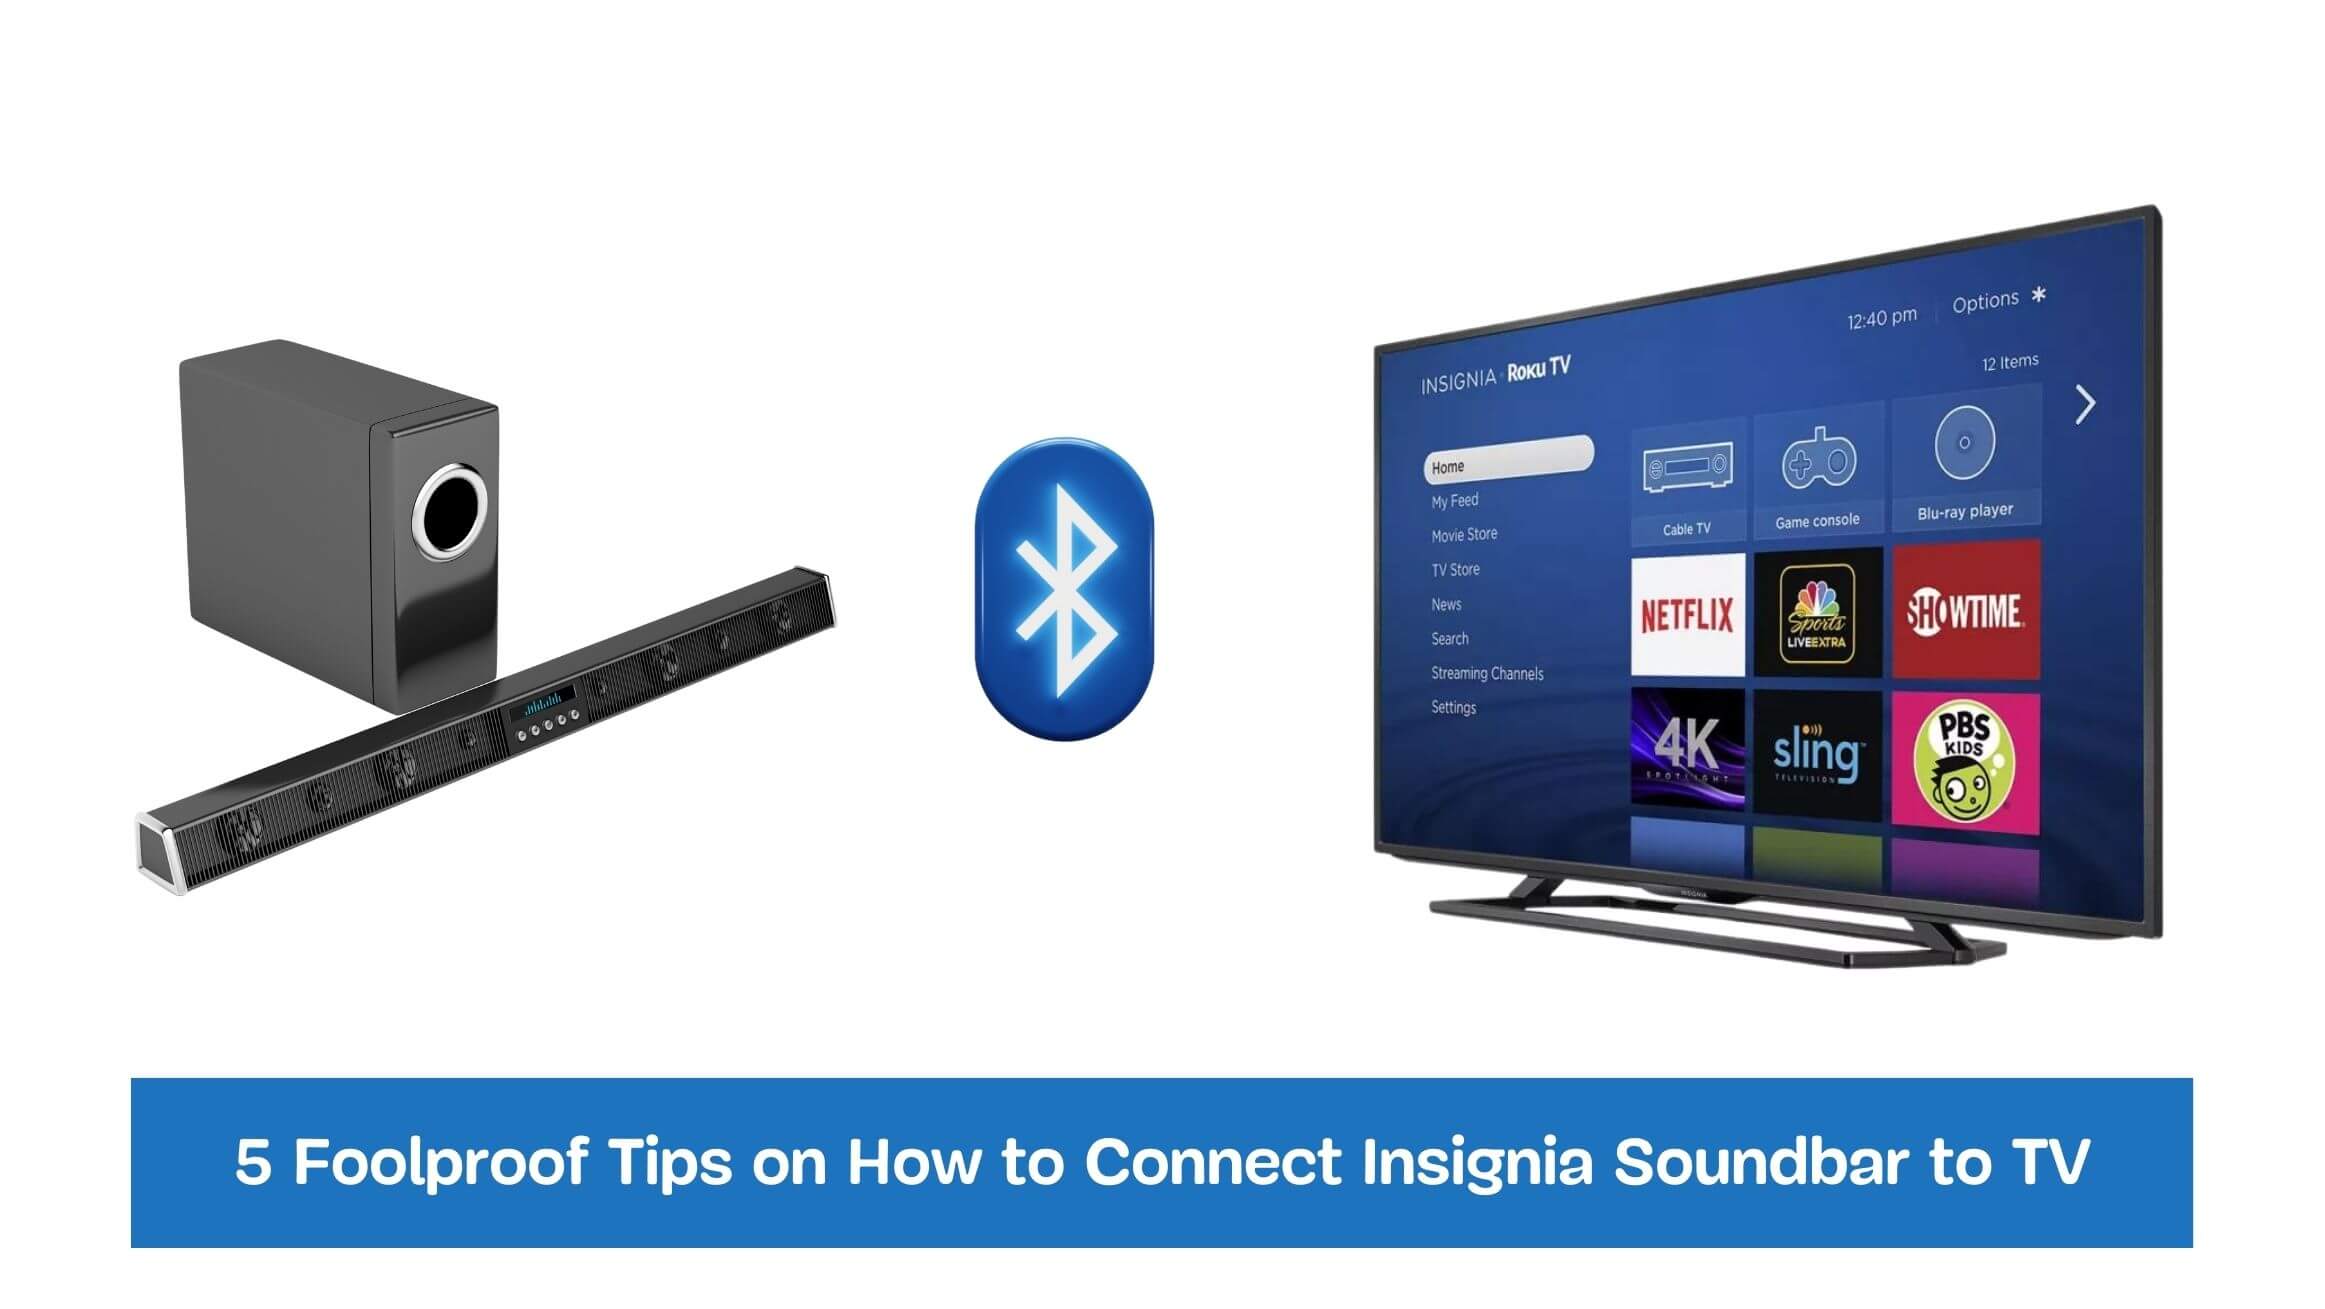 5 Foolproof Tips on How to Connect Insignia Soundbar to TV